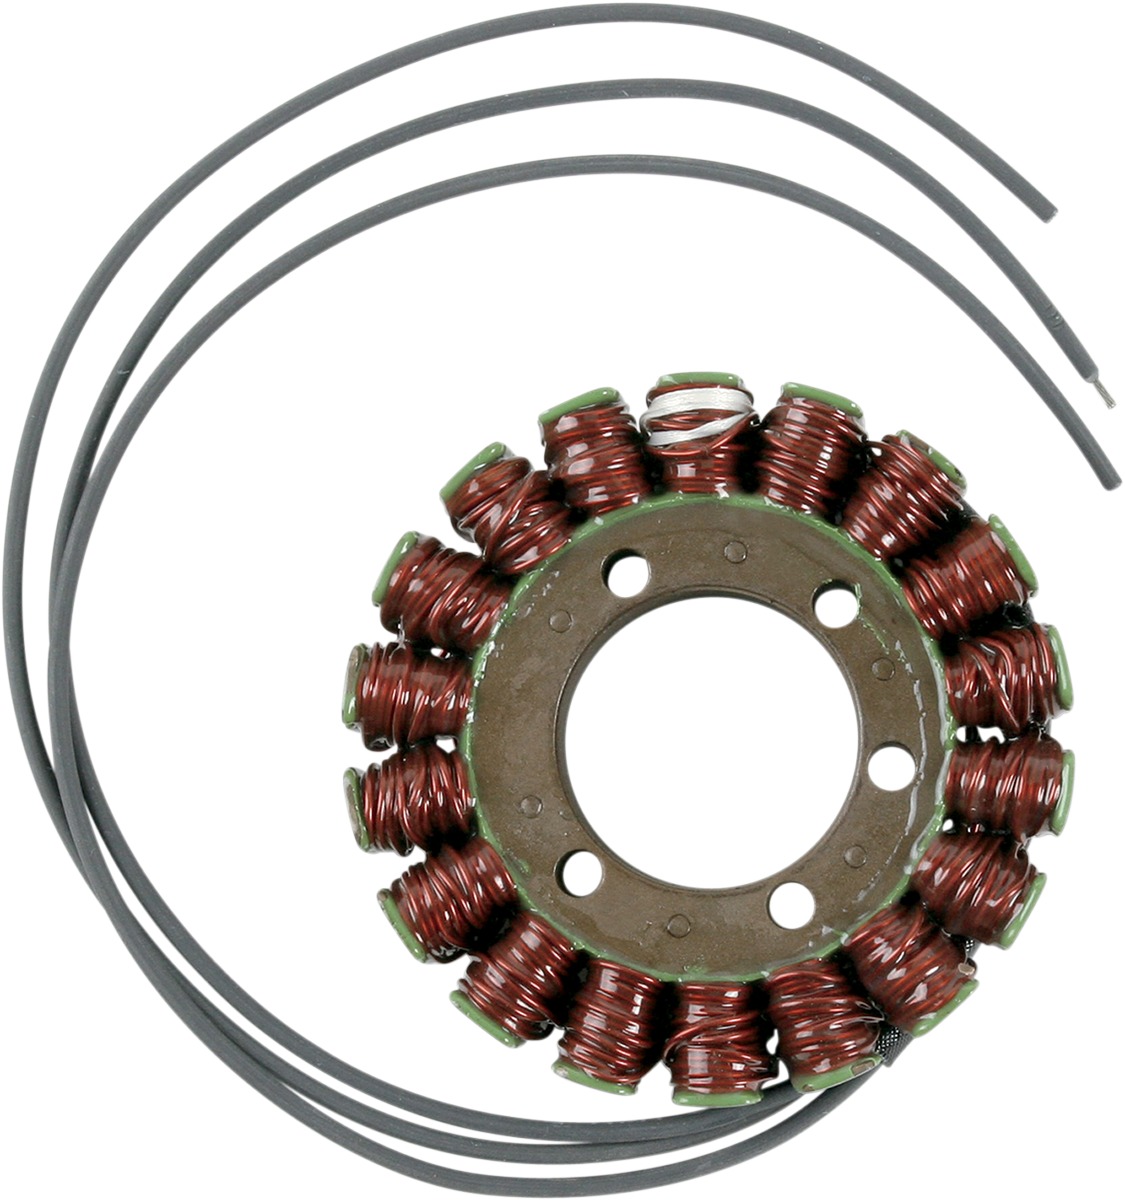 Stator Kit - For 97-01 Yamaha YZF600R - Click Image to Close